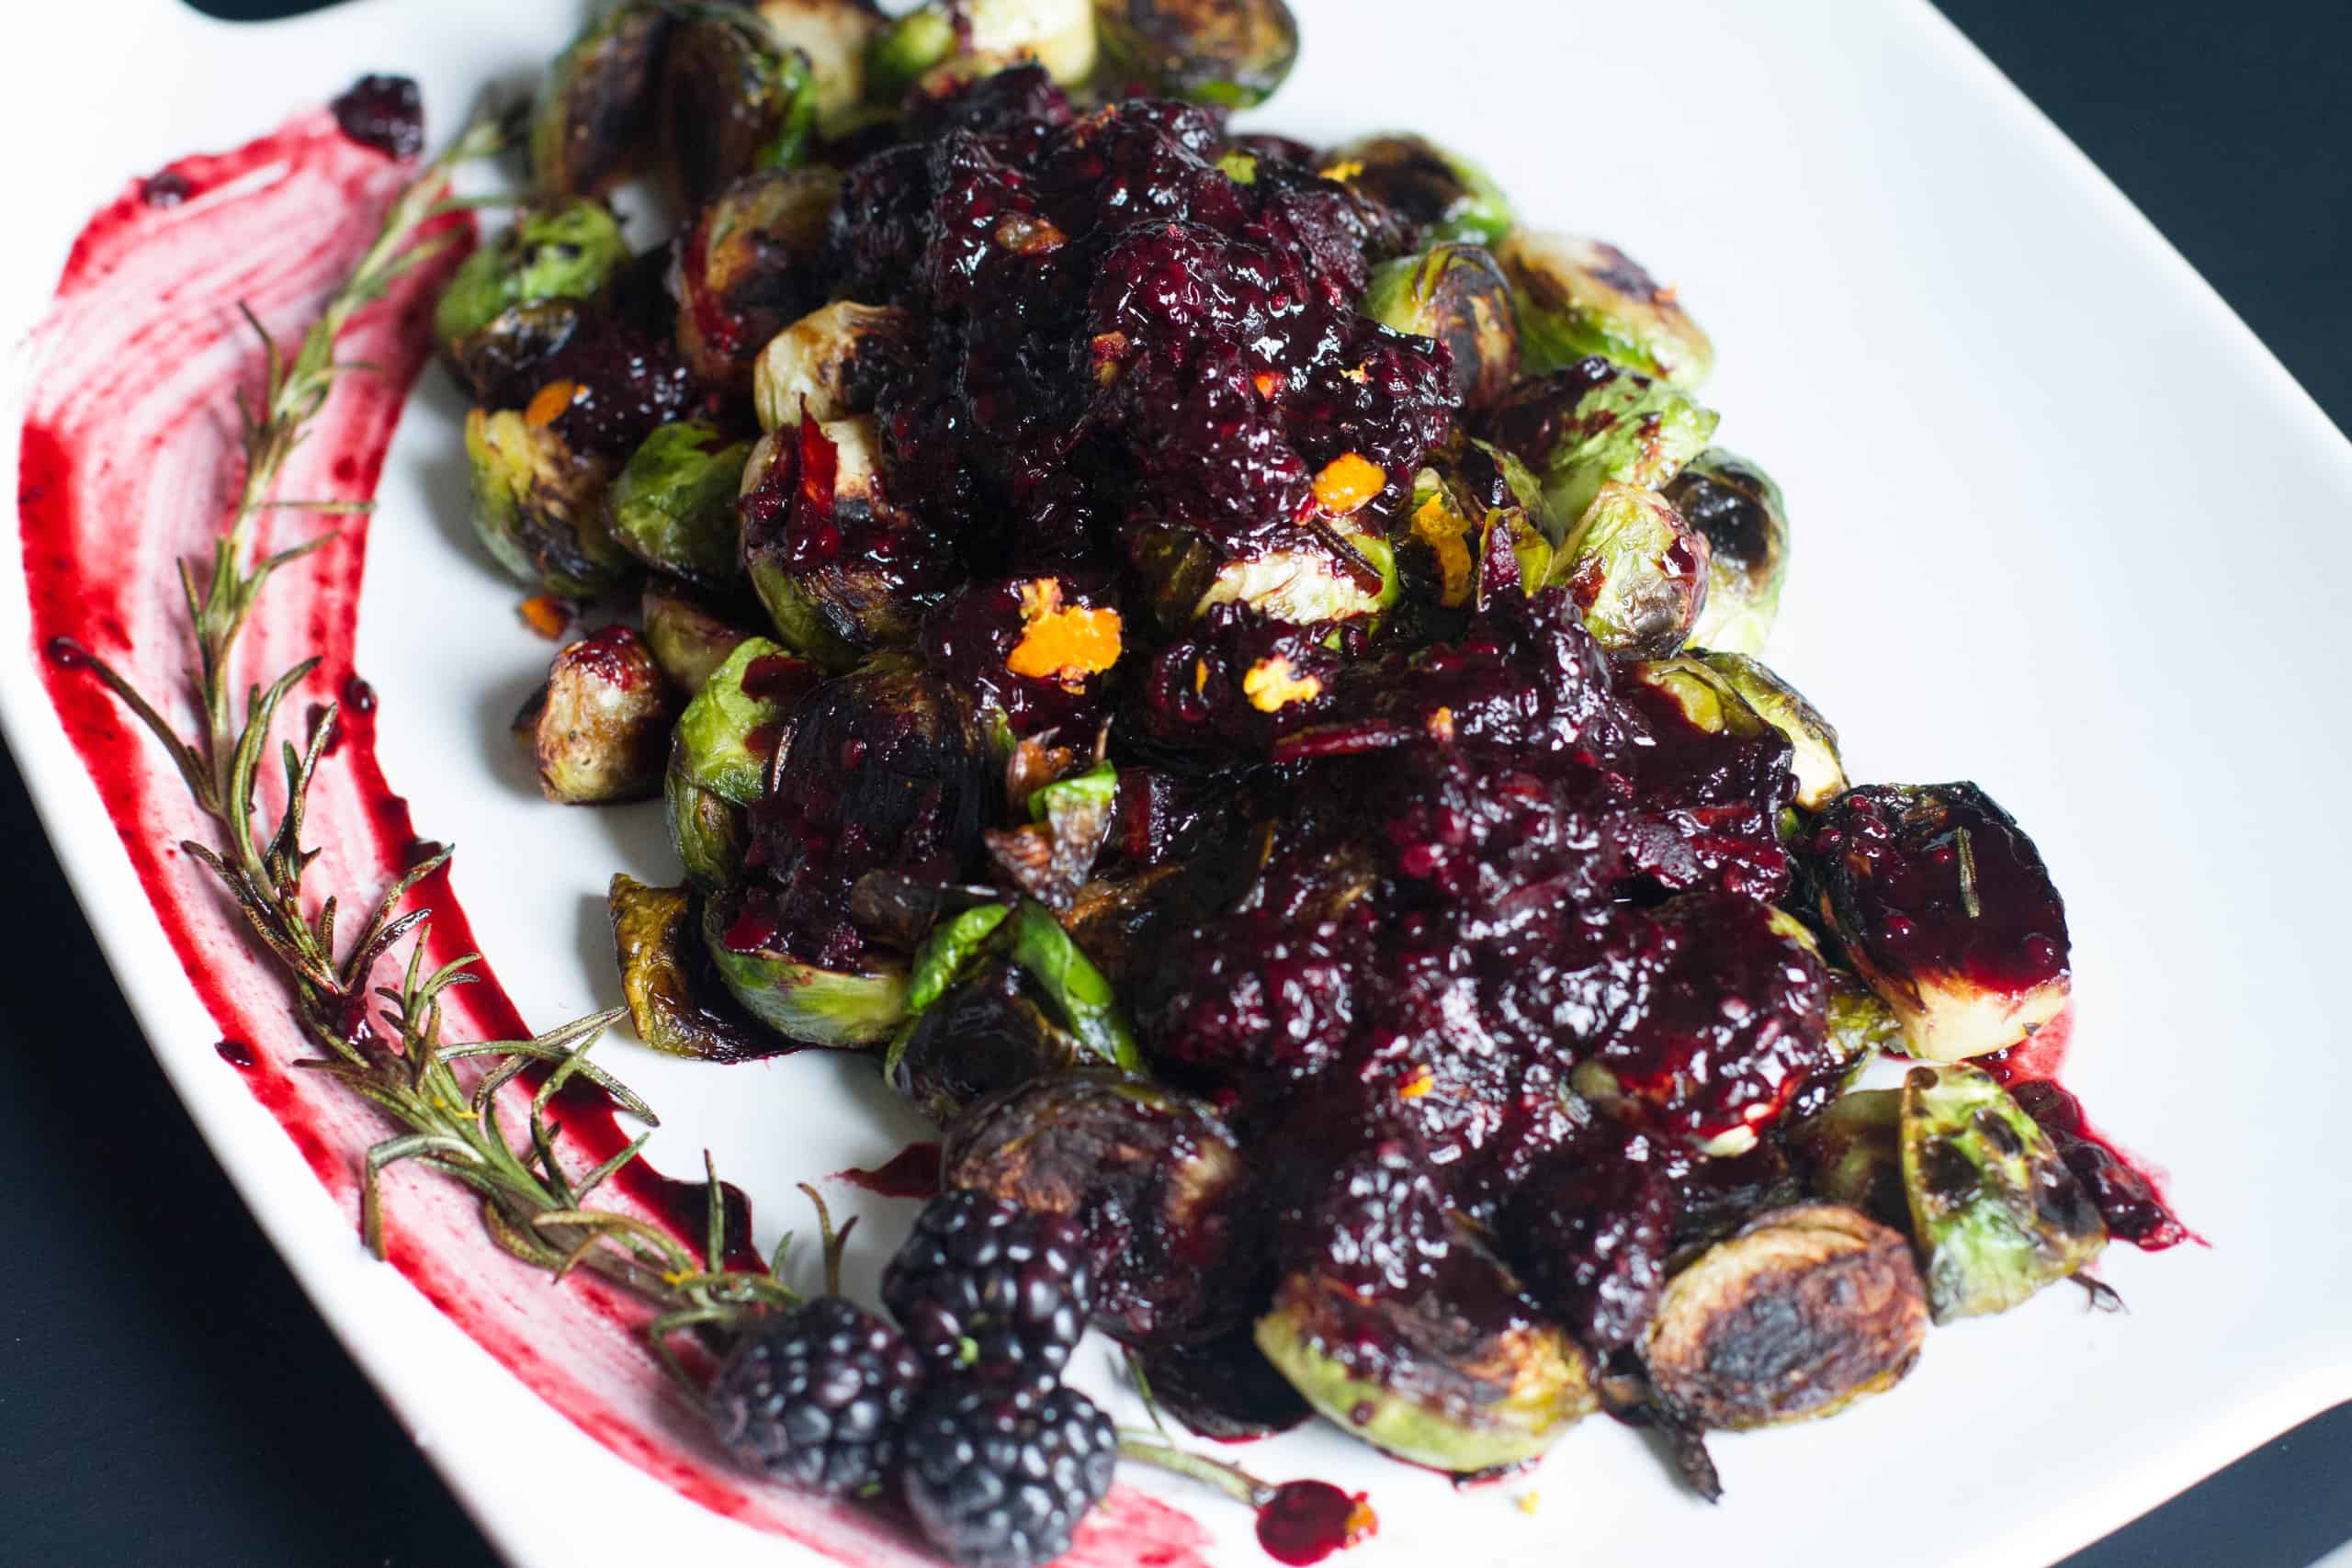 Crispy Brussels Sprouts with Blackberry Reduction